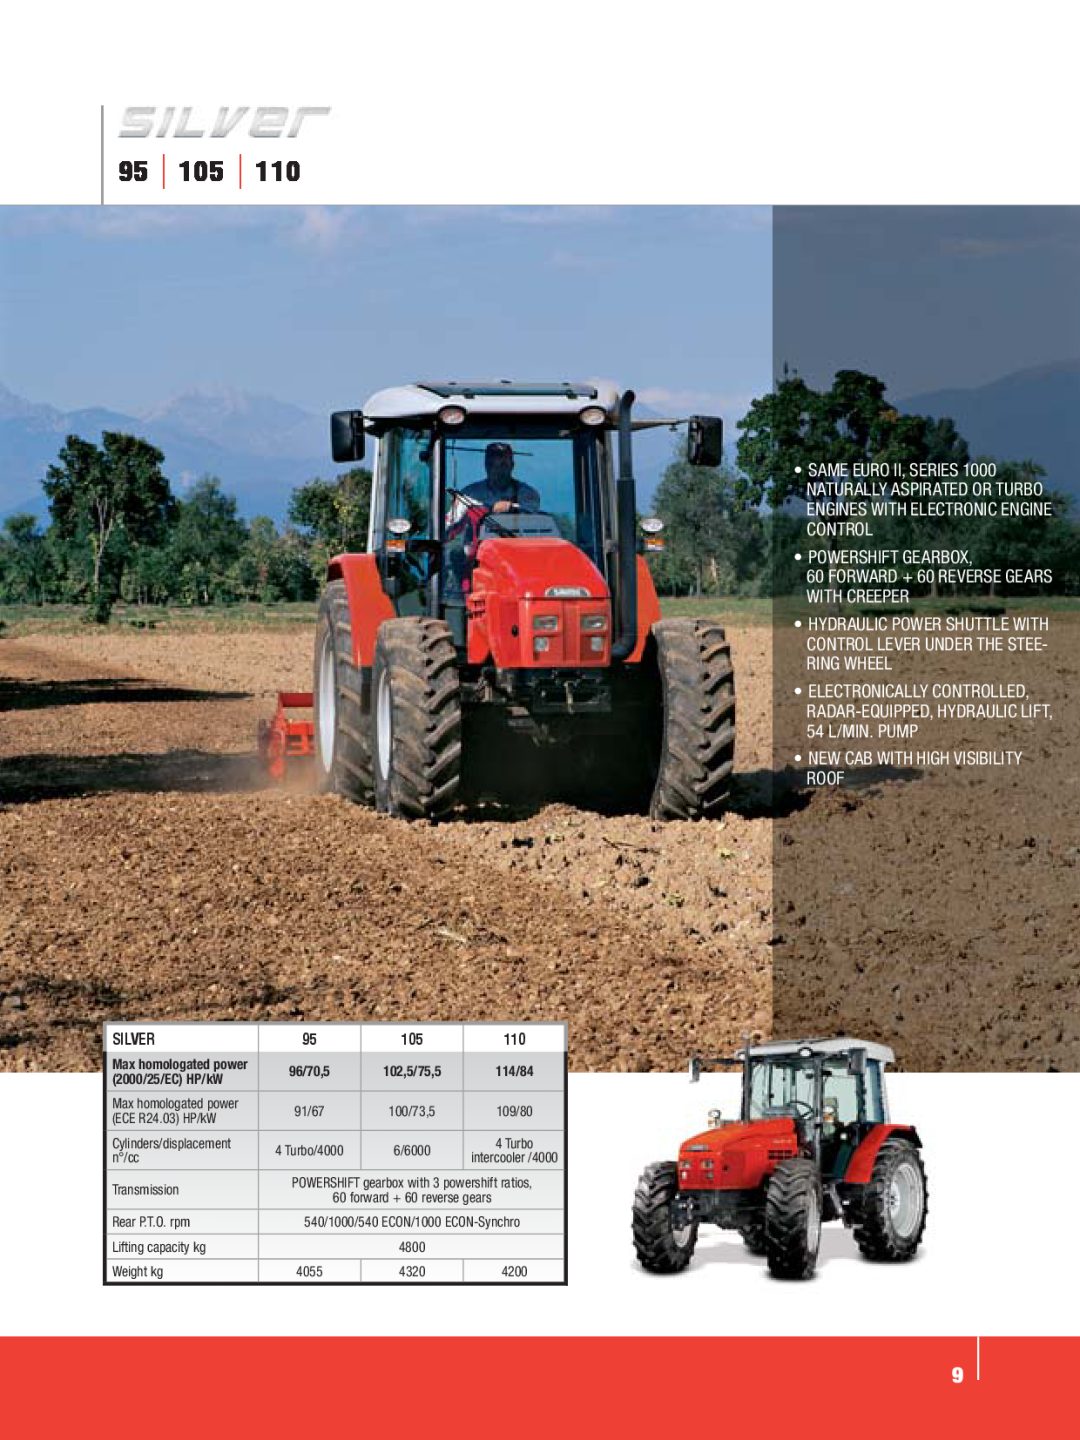 SAME Tractors manual •Powershift Gearbox, New Cab With High Visibility Roof, Silver 